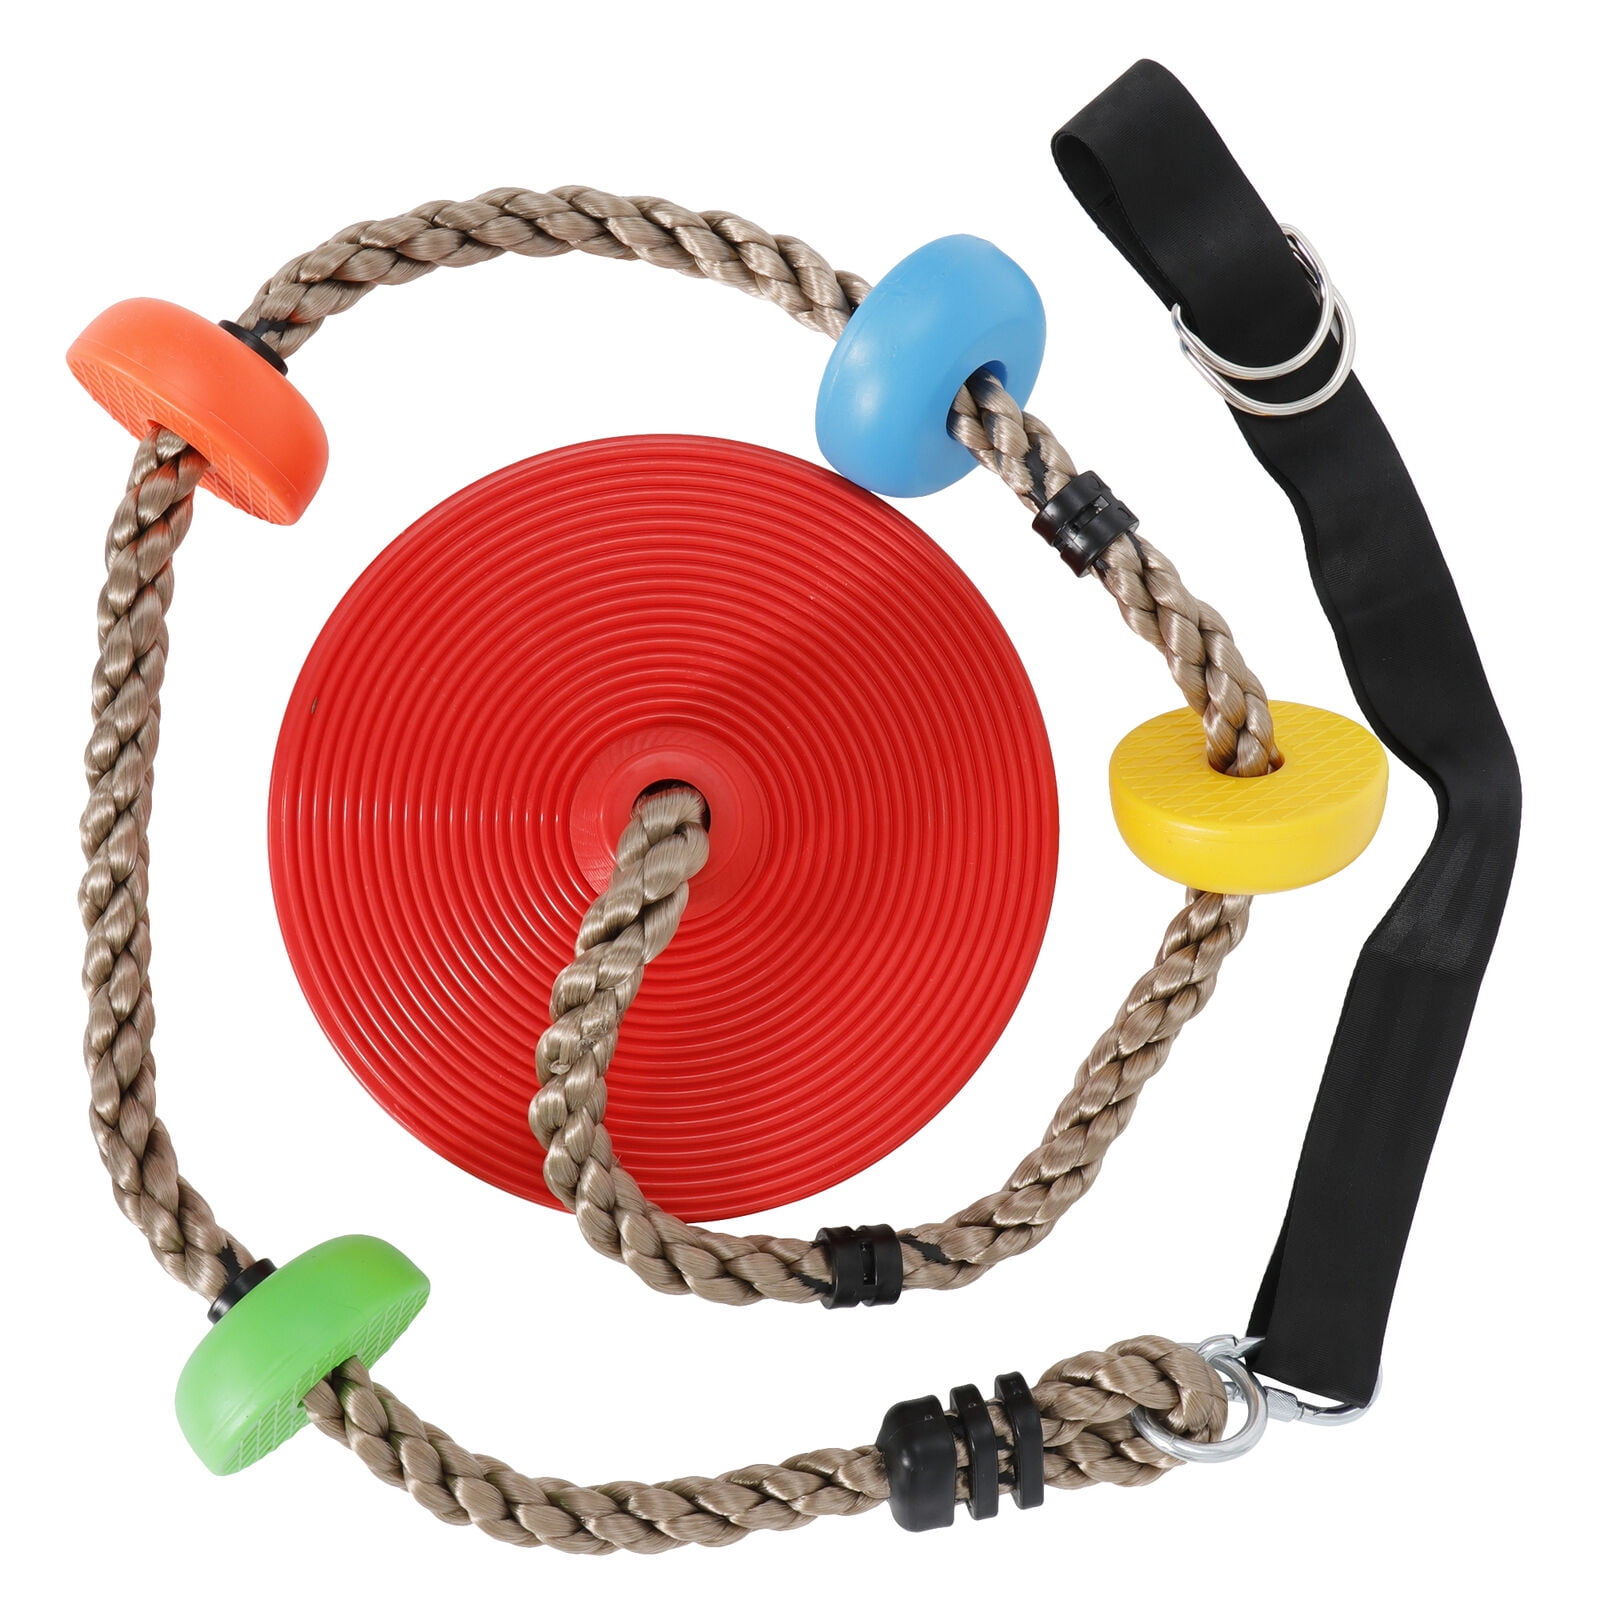 Tree Swing Climbing Rope with Platforms Disc Swing Seat Playground Kids Outdoor 